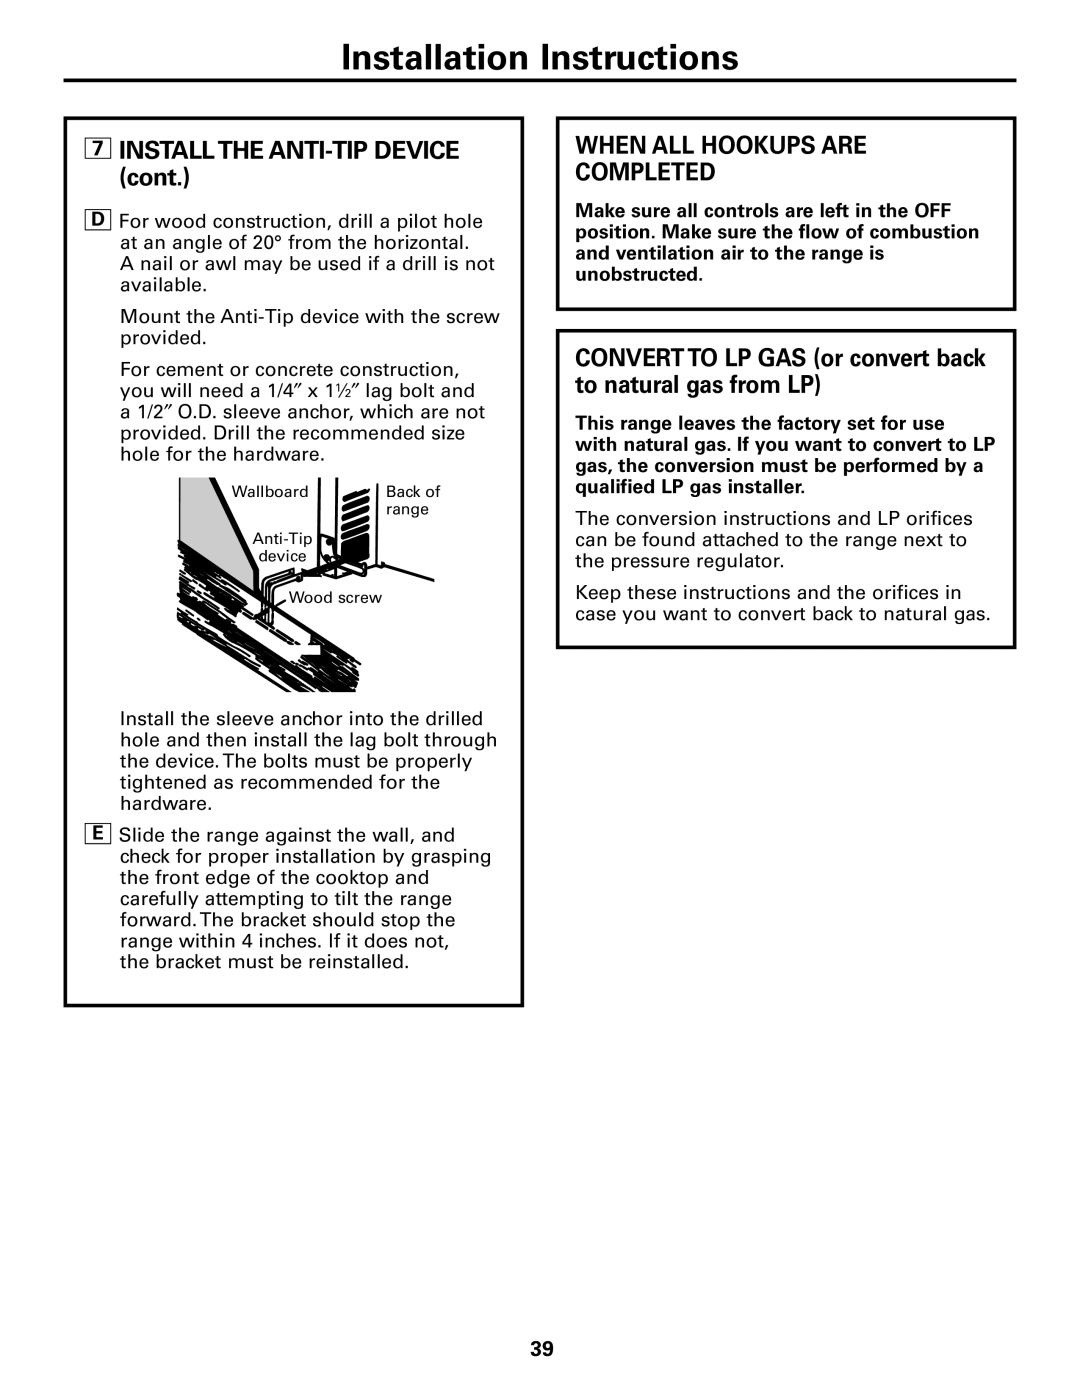 Americana Appliances AGBS300 7INSTALLTHE ANTI-TIPDEVICE cont, When All Hookups Are Completed, Installation Instructions 